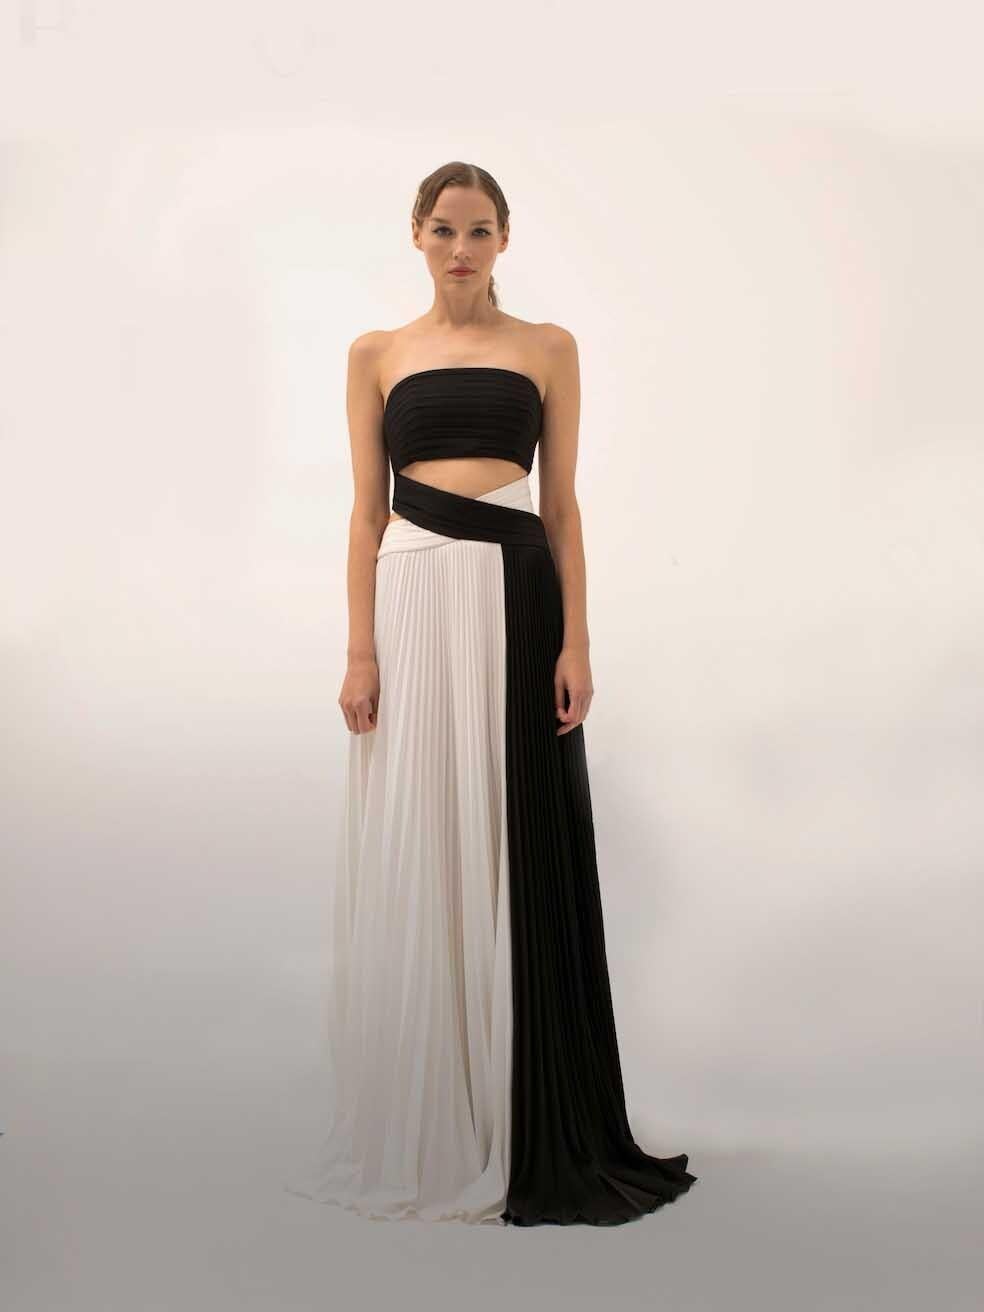 CONDITION is Never Worn With Tag. Minimal wear to dress is evident. Minimal wear to the waist exterior and lining with slight discolouration on this used Honayda designer resale item.
 
 
 
 Details
 
 
 S/S 23
 
 Black and white
 
 Polyester
 
